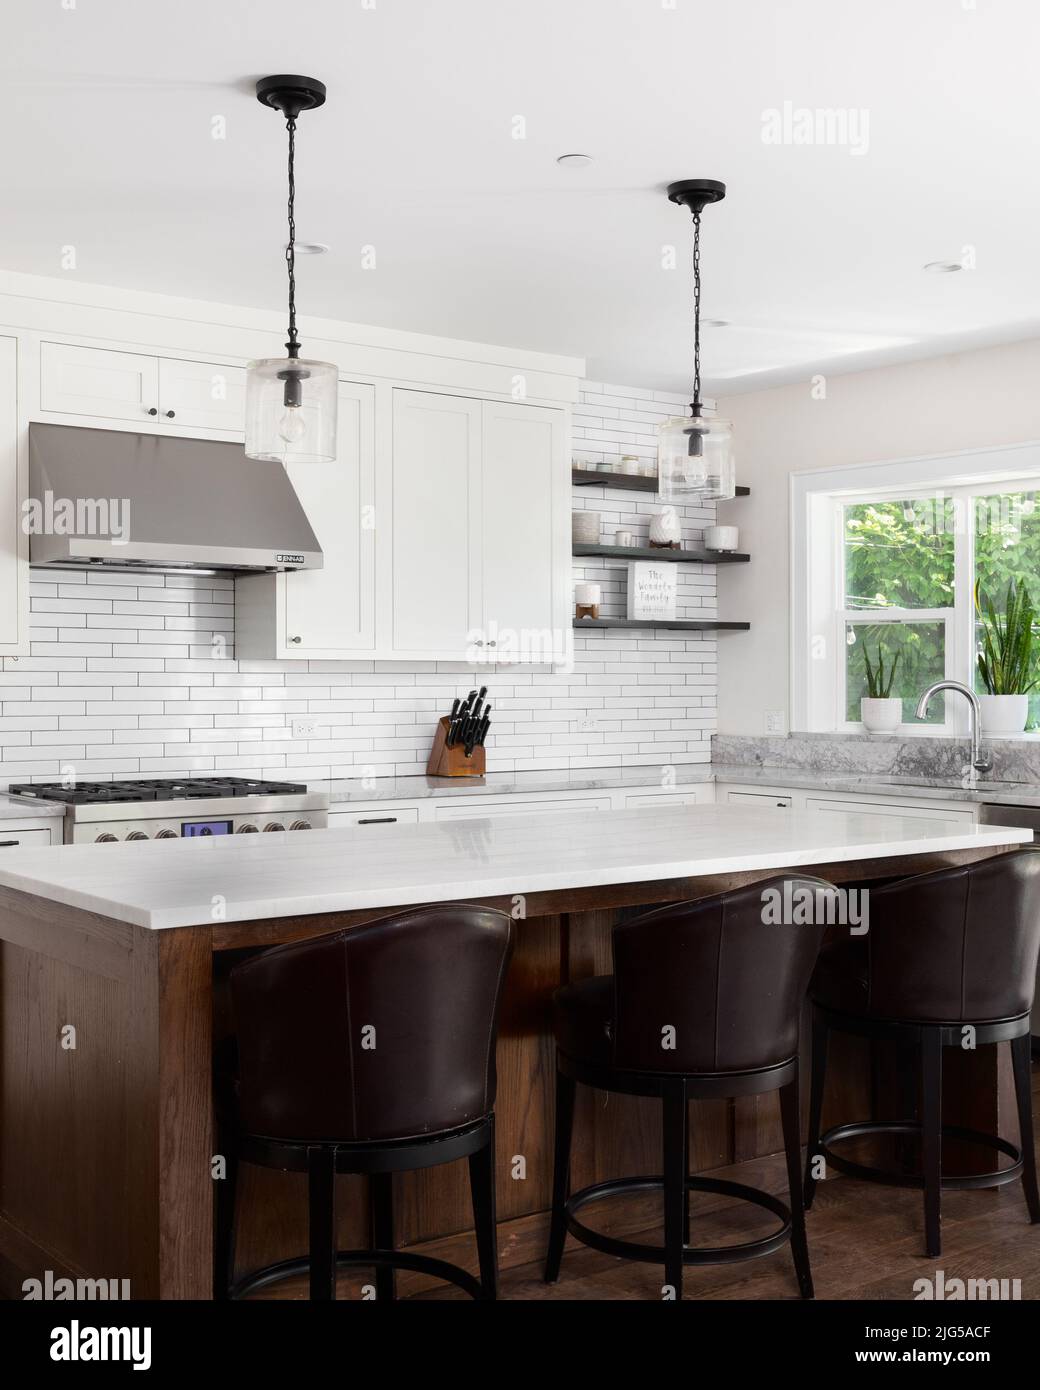 A beautiful modern farmhouse kitchen with white cabinets, a subway tile backsplash, chairs sitting at a large wood island, and marble countertops. Stock Photo